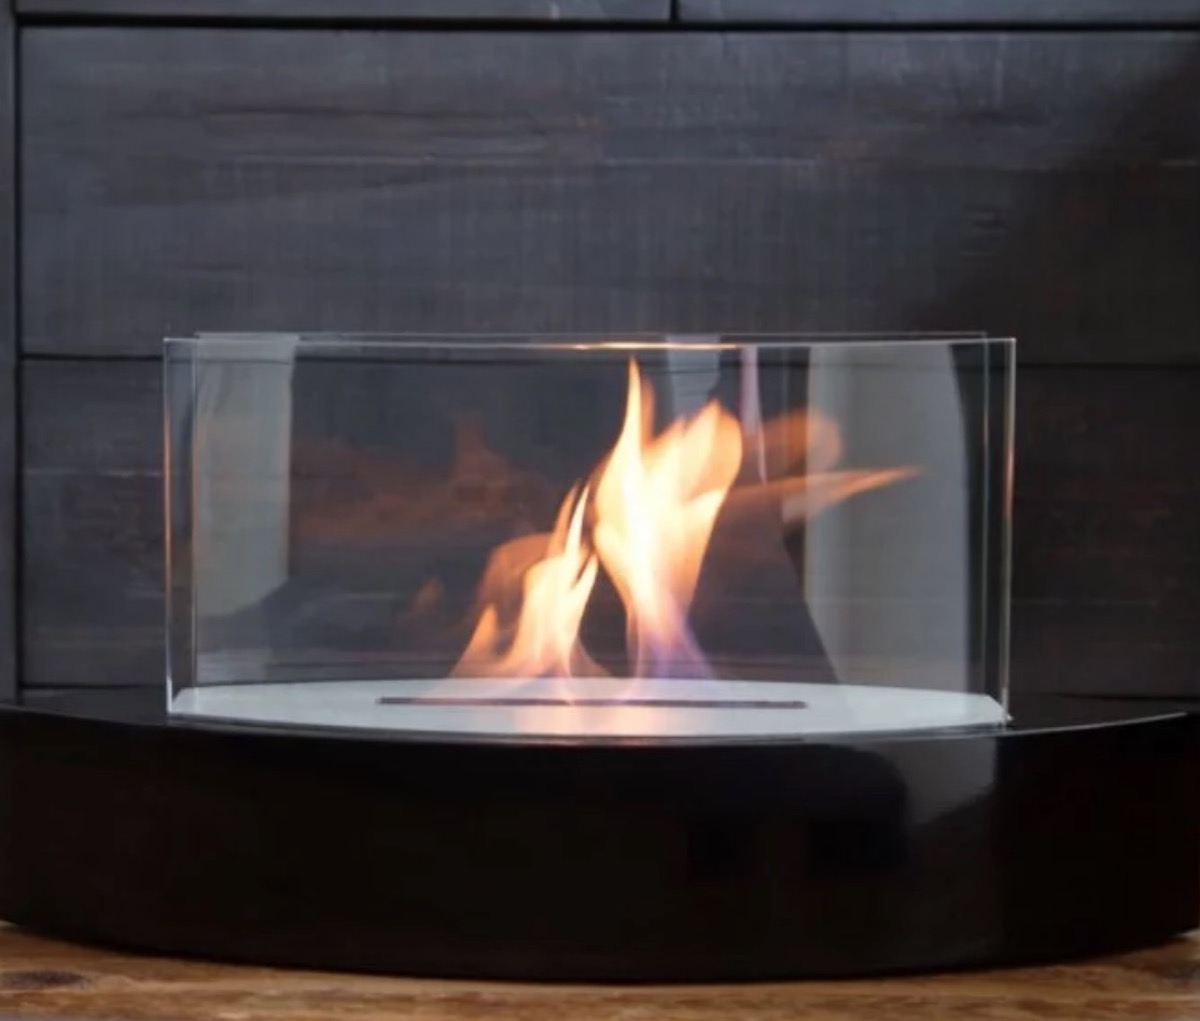 tabletop fireplace with flame in it, fall decorating tips